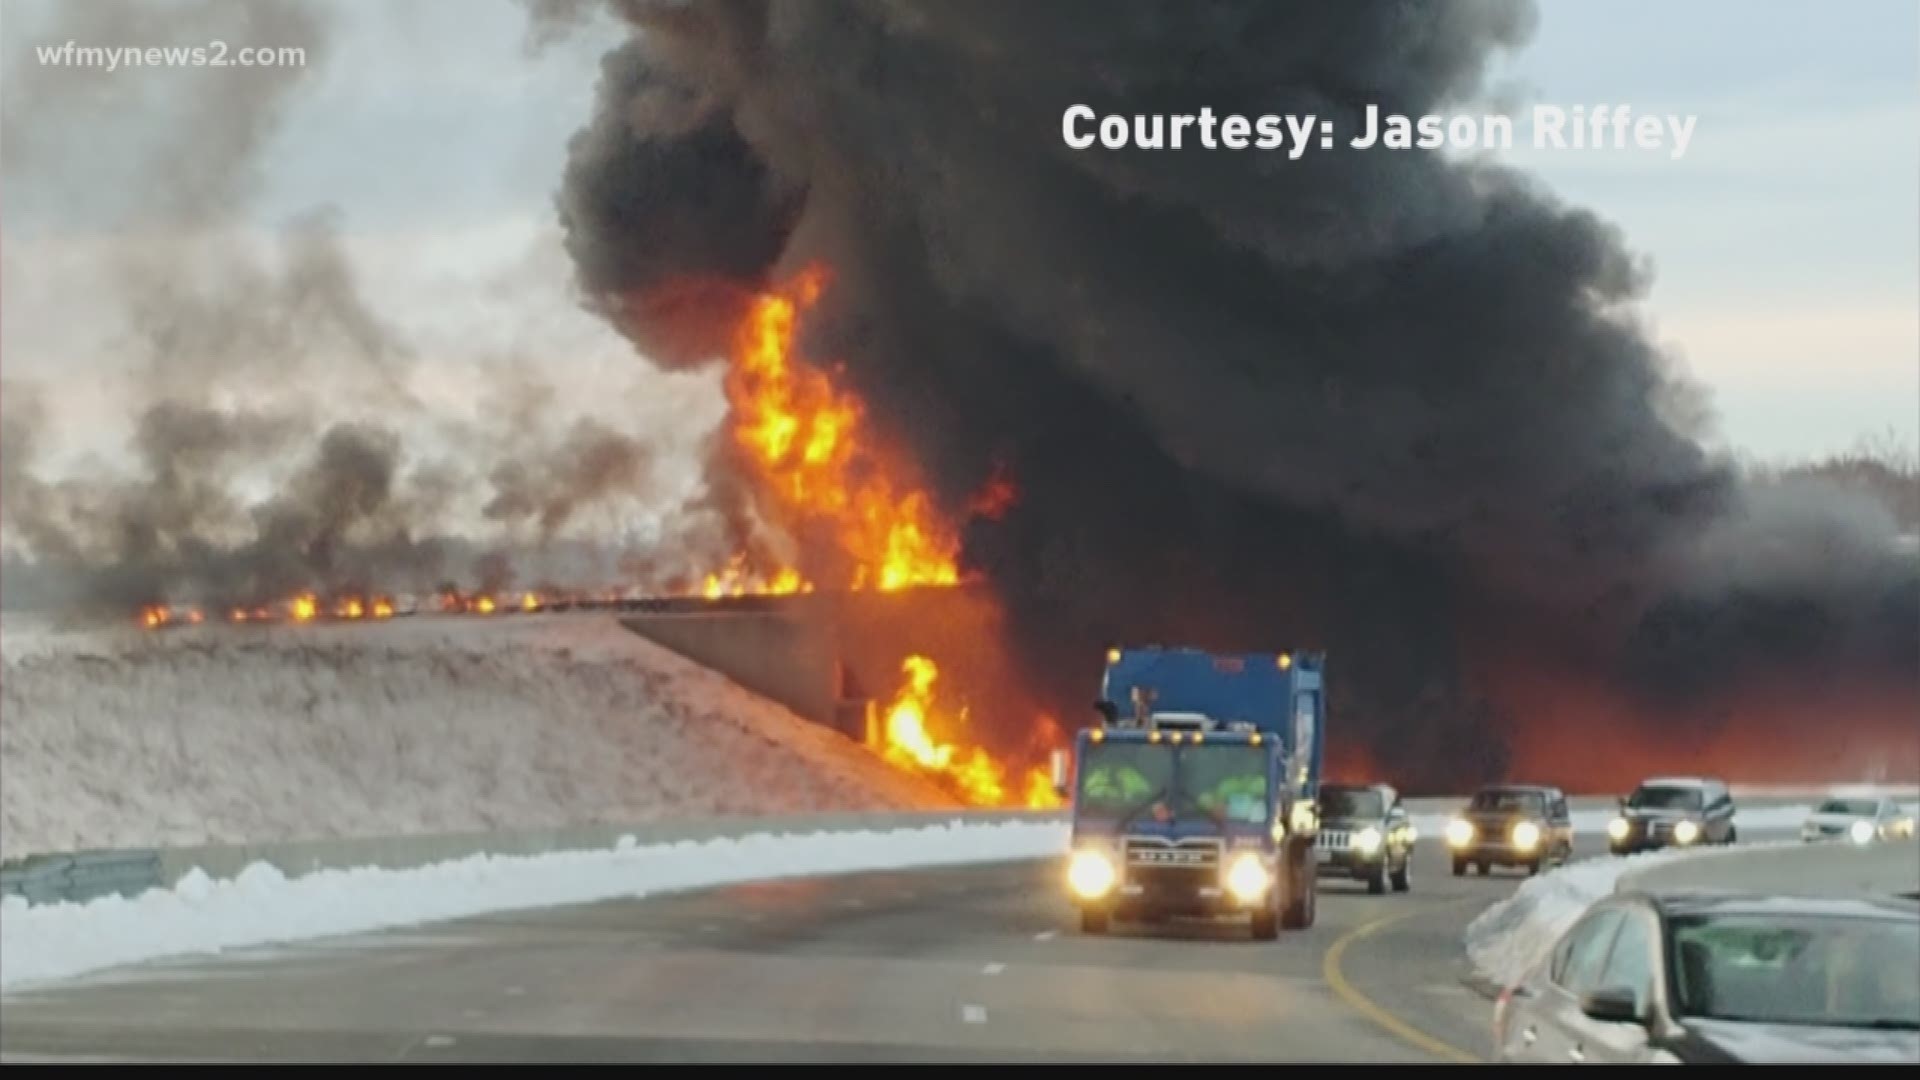 WFMY News 2's Adaure Achumba Takes A Look At The Damage A gasoline tanker crash left behind.